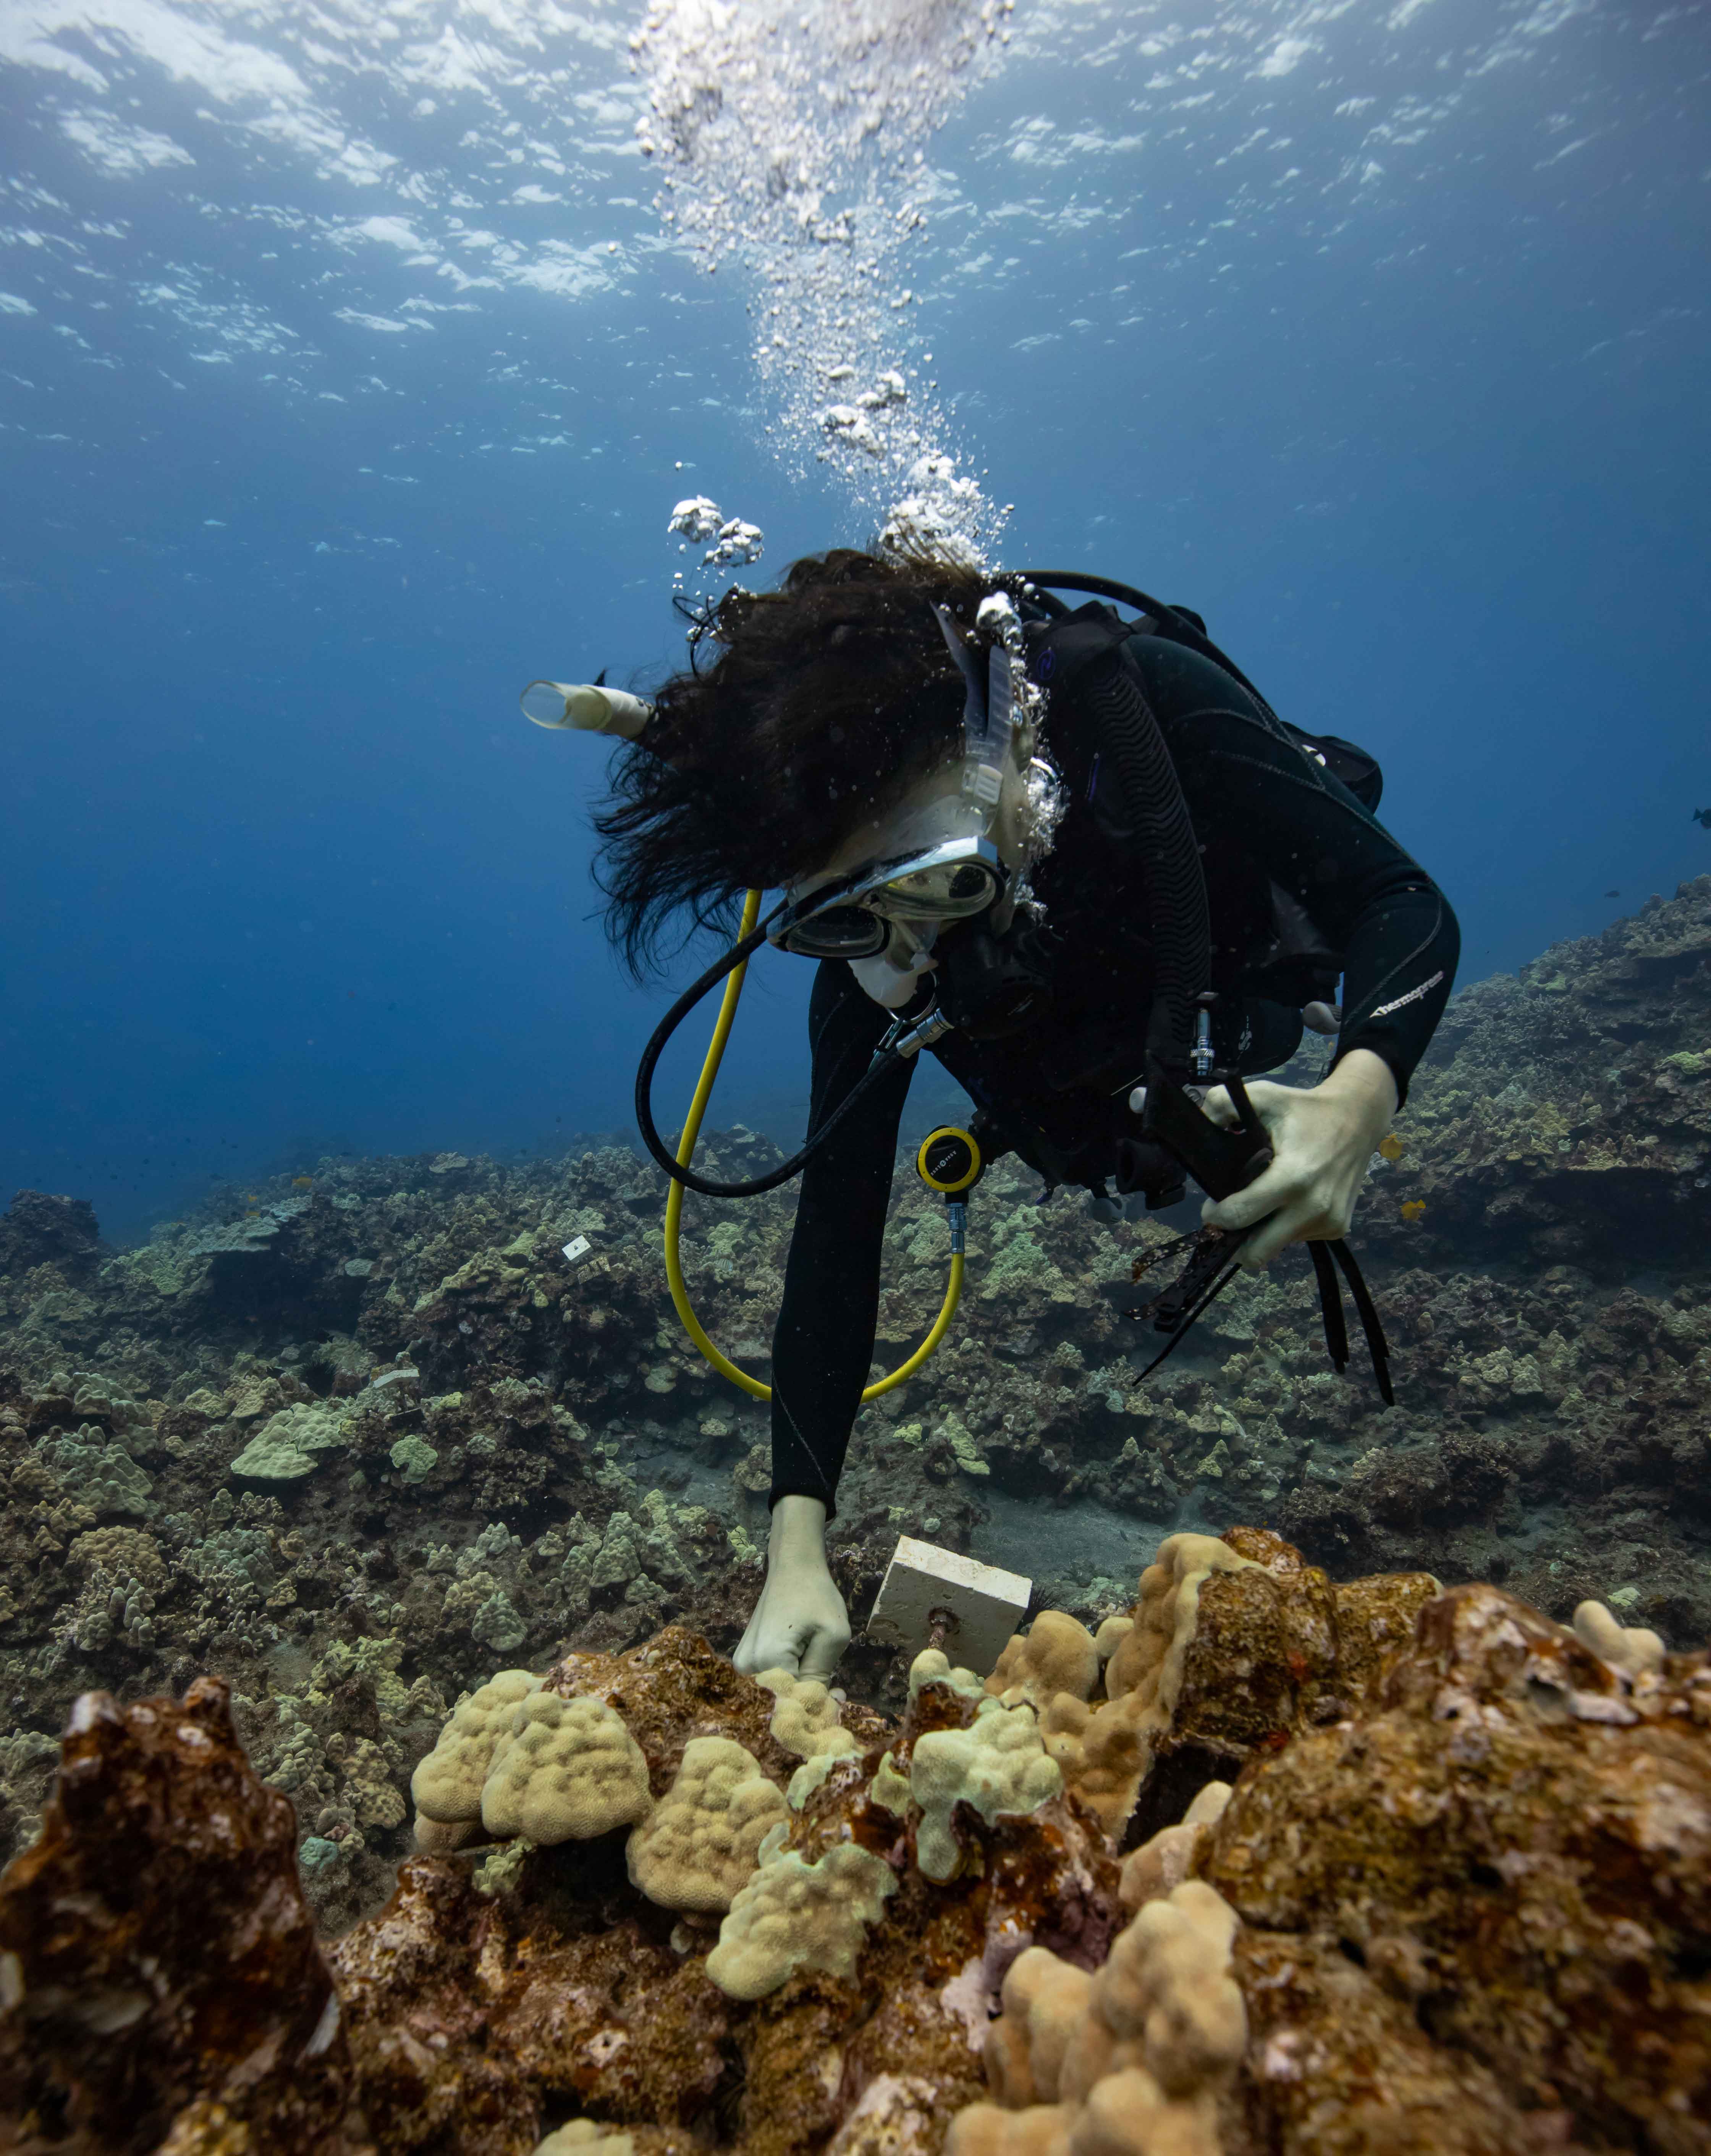 A scuba diver with an instrument near coral under the water